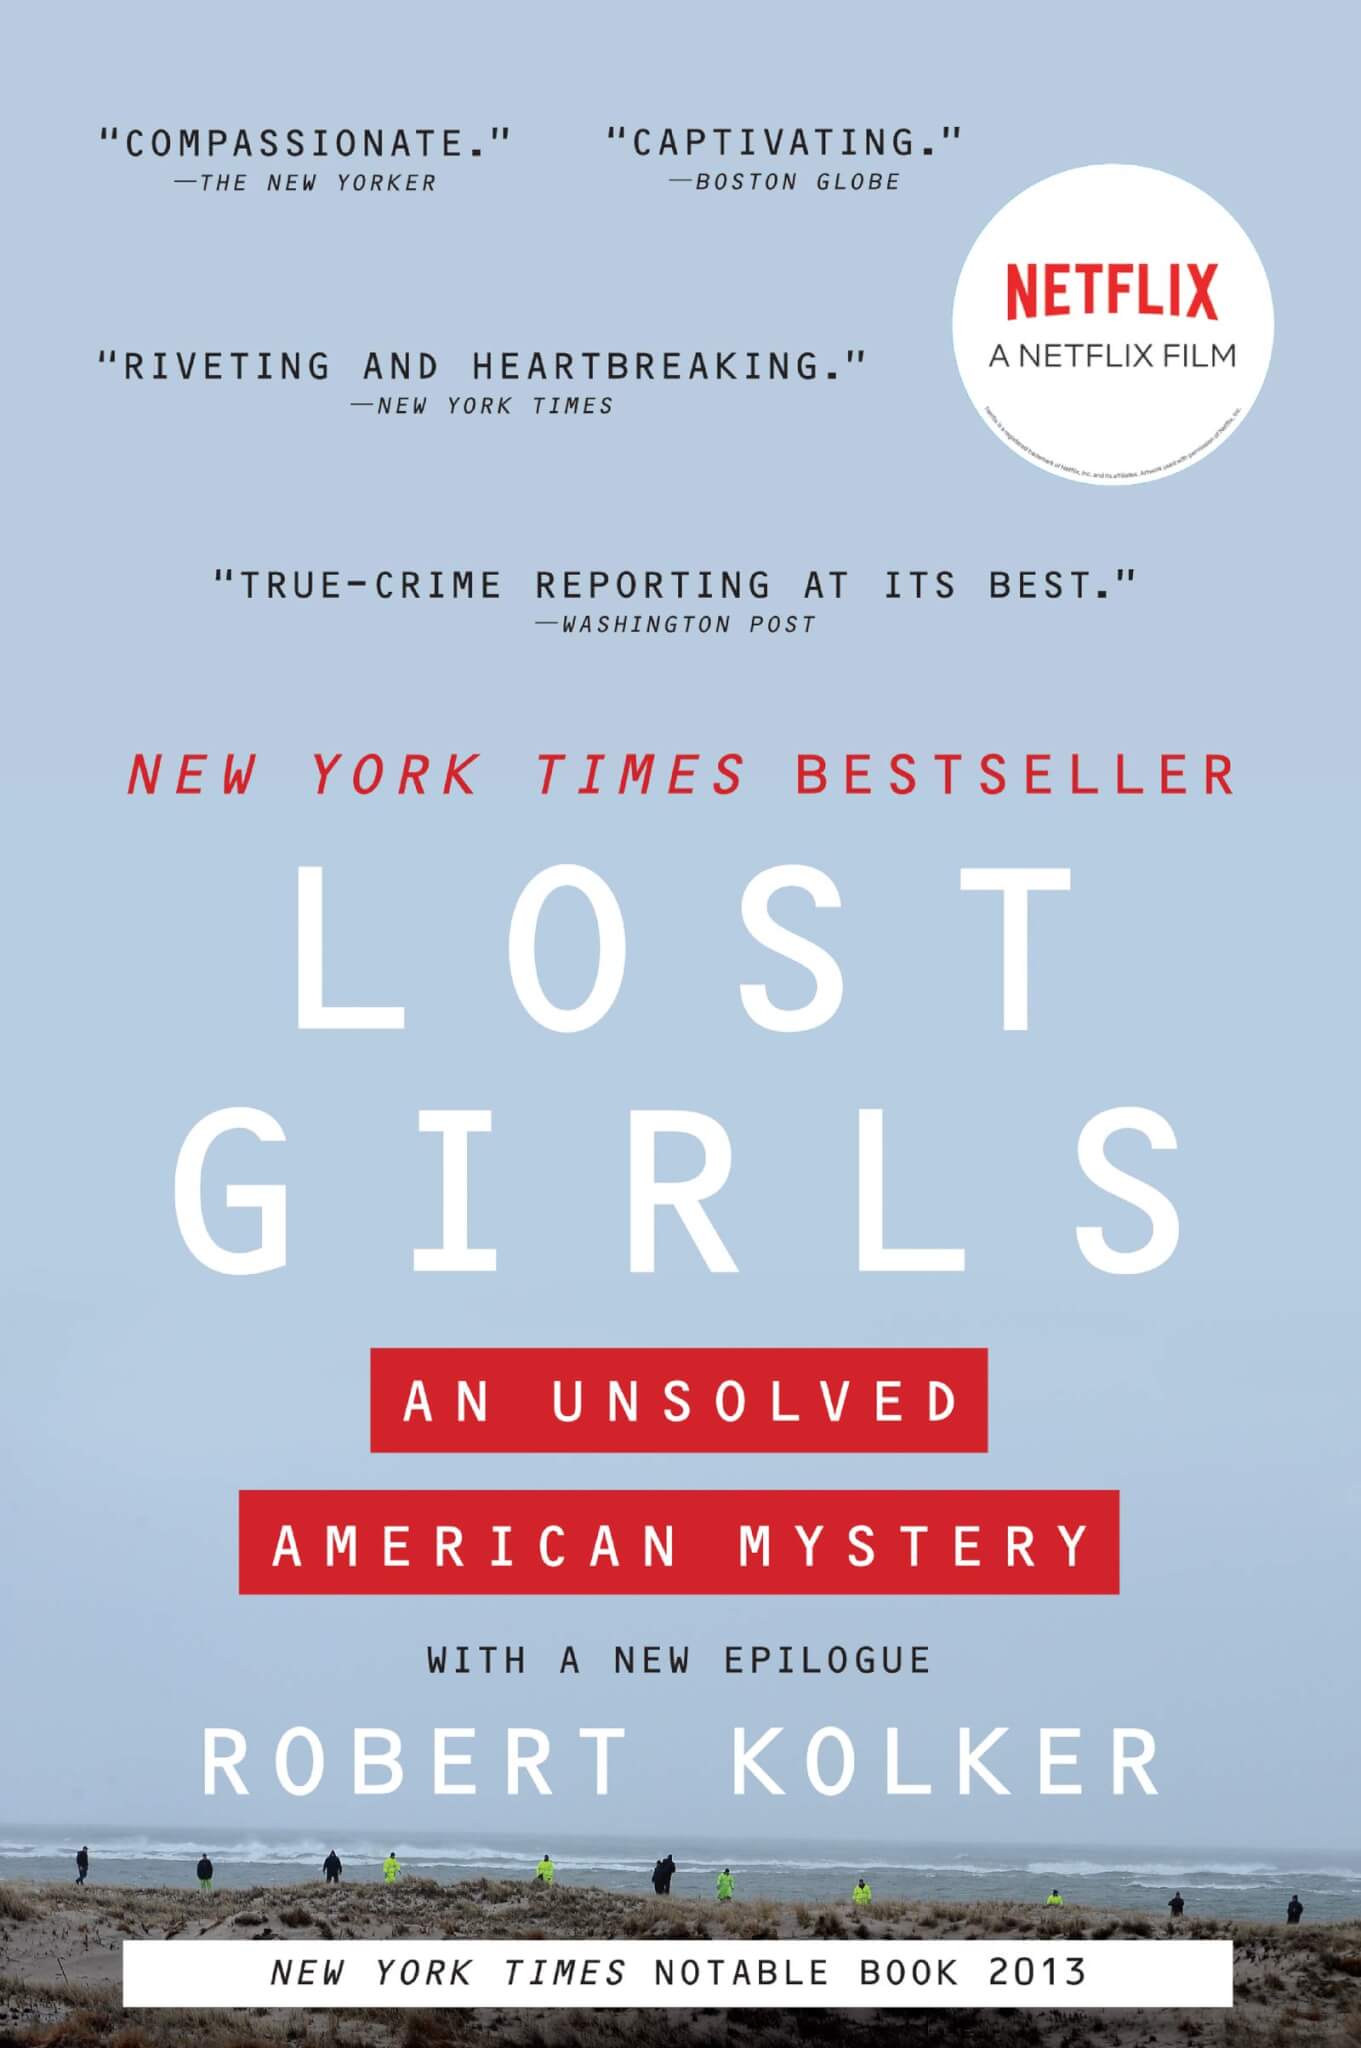 "Lost Girls: An Unsolved American Mystery" by Robert Kolker